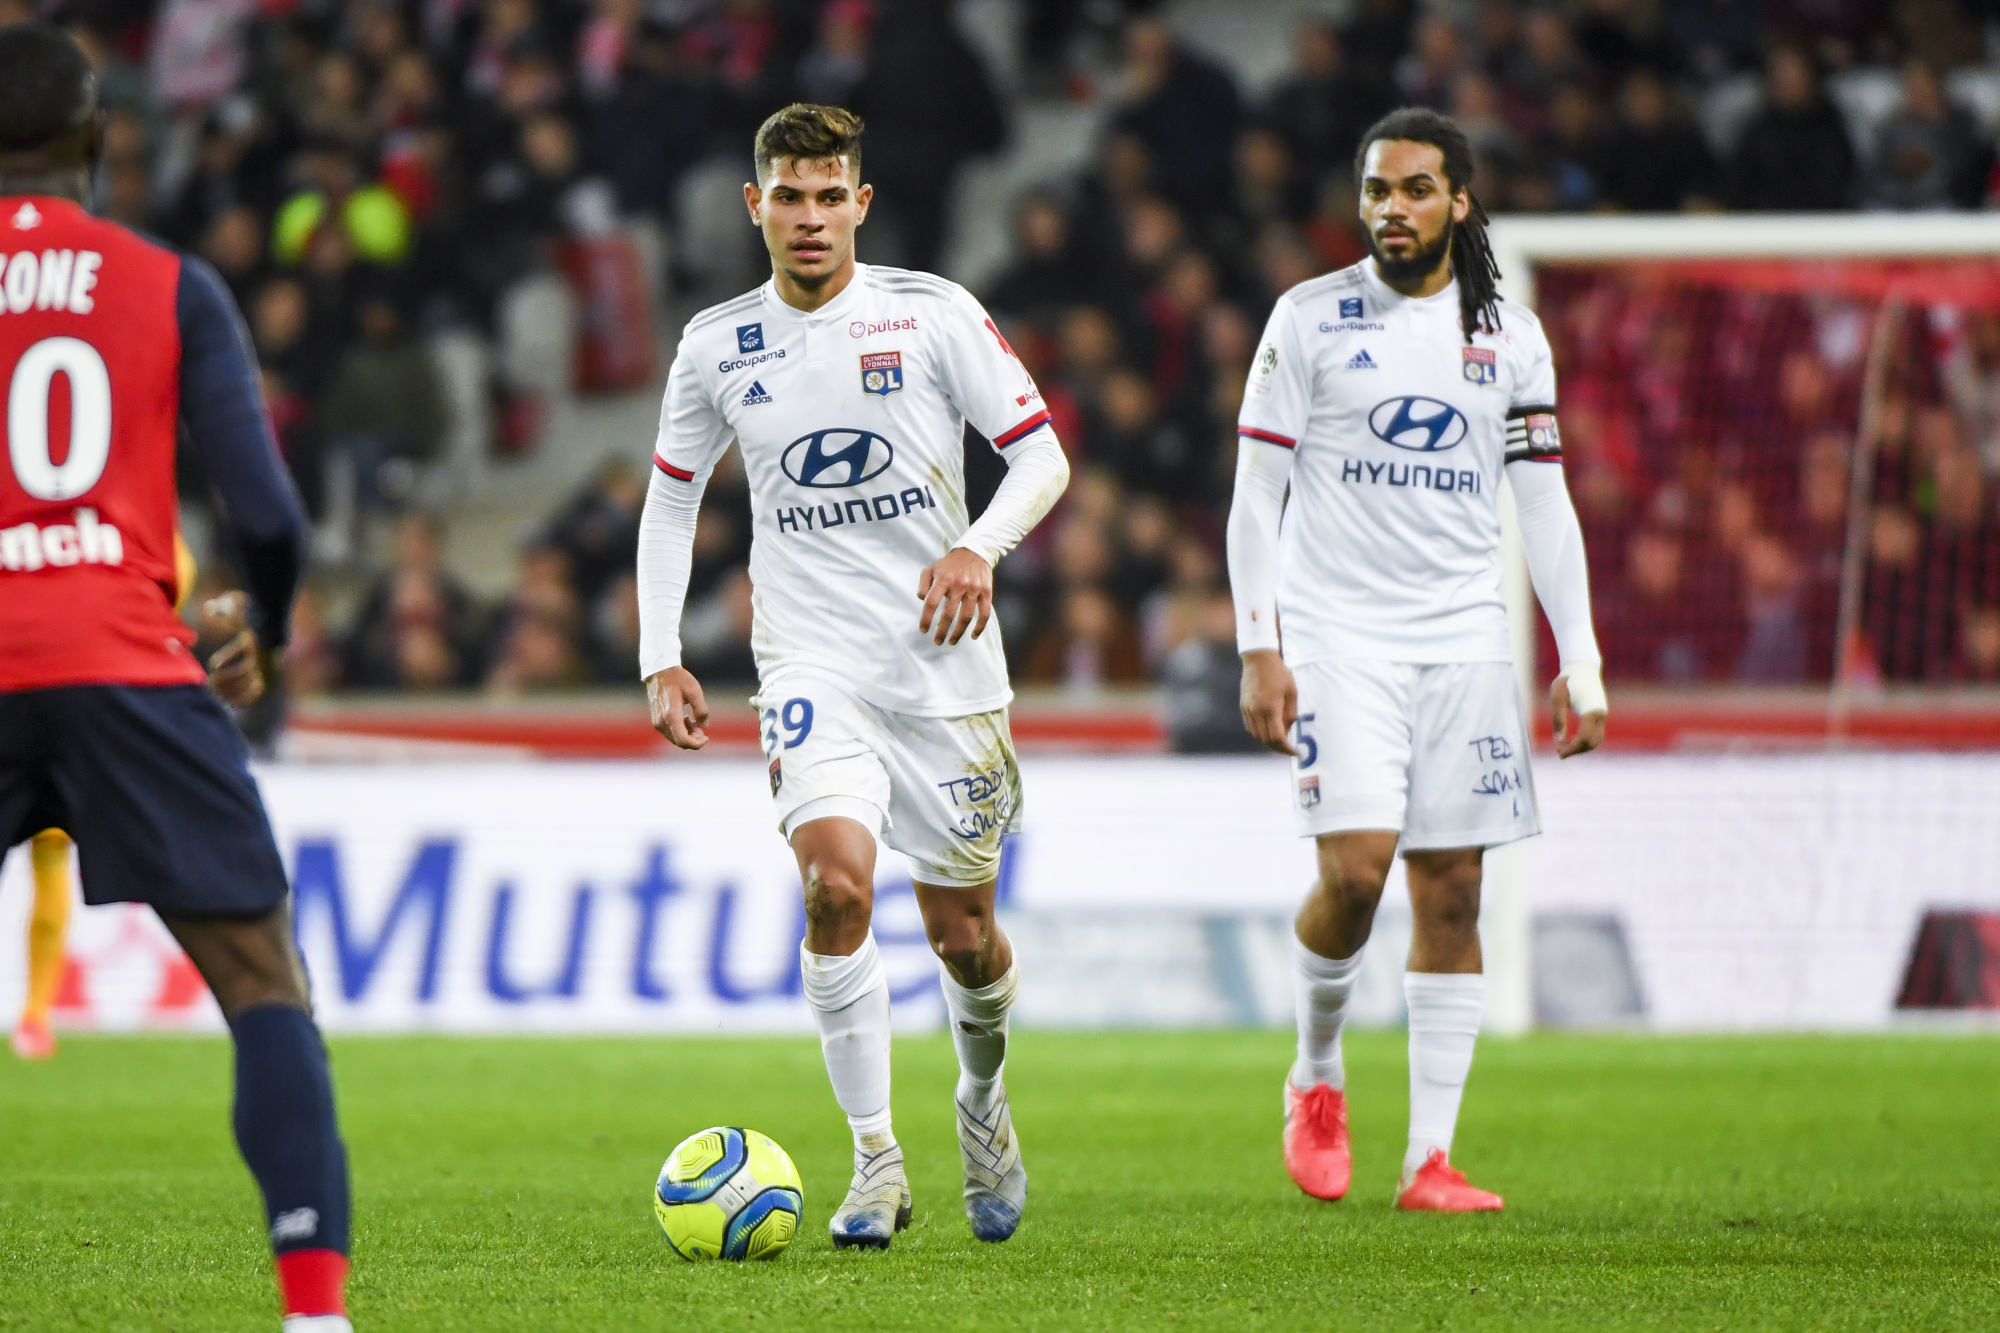 Bruno GUIMARAES of Olympique Lyonnais and Jason DENAYER of Olympique Lyonnais during the Ligue 1 match between Lille and Lyon at Stade Pierre-Mauroy on March 8, 2020 in Lille, France. (Photo by Aude Alcover/Icon Sport) - Bruno GUIMARAES - Jason DENAYER - Stade Pierre Mauroy - Lille (France)